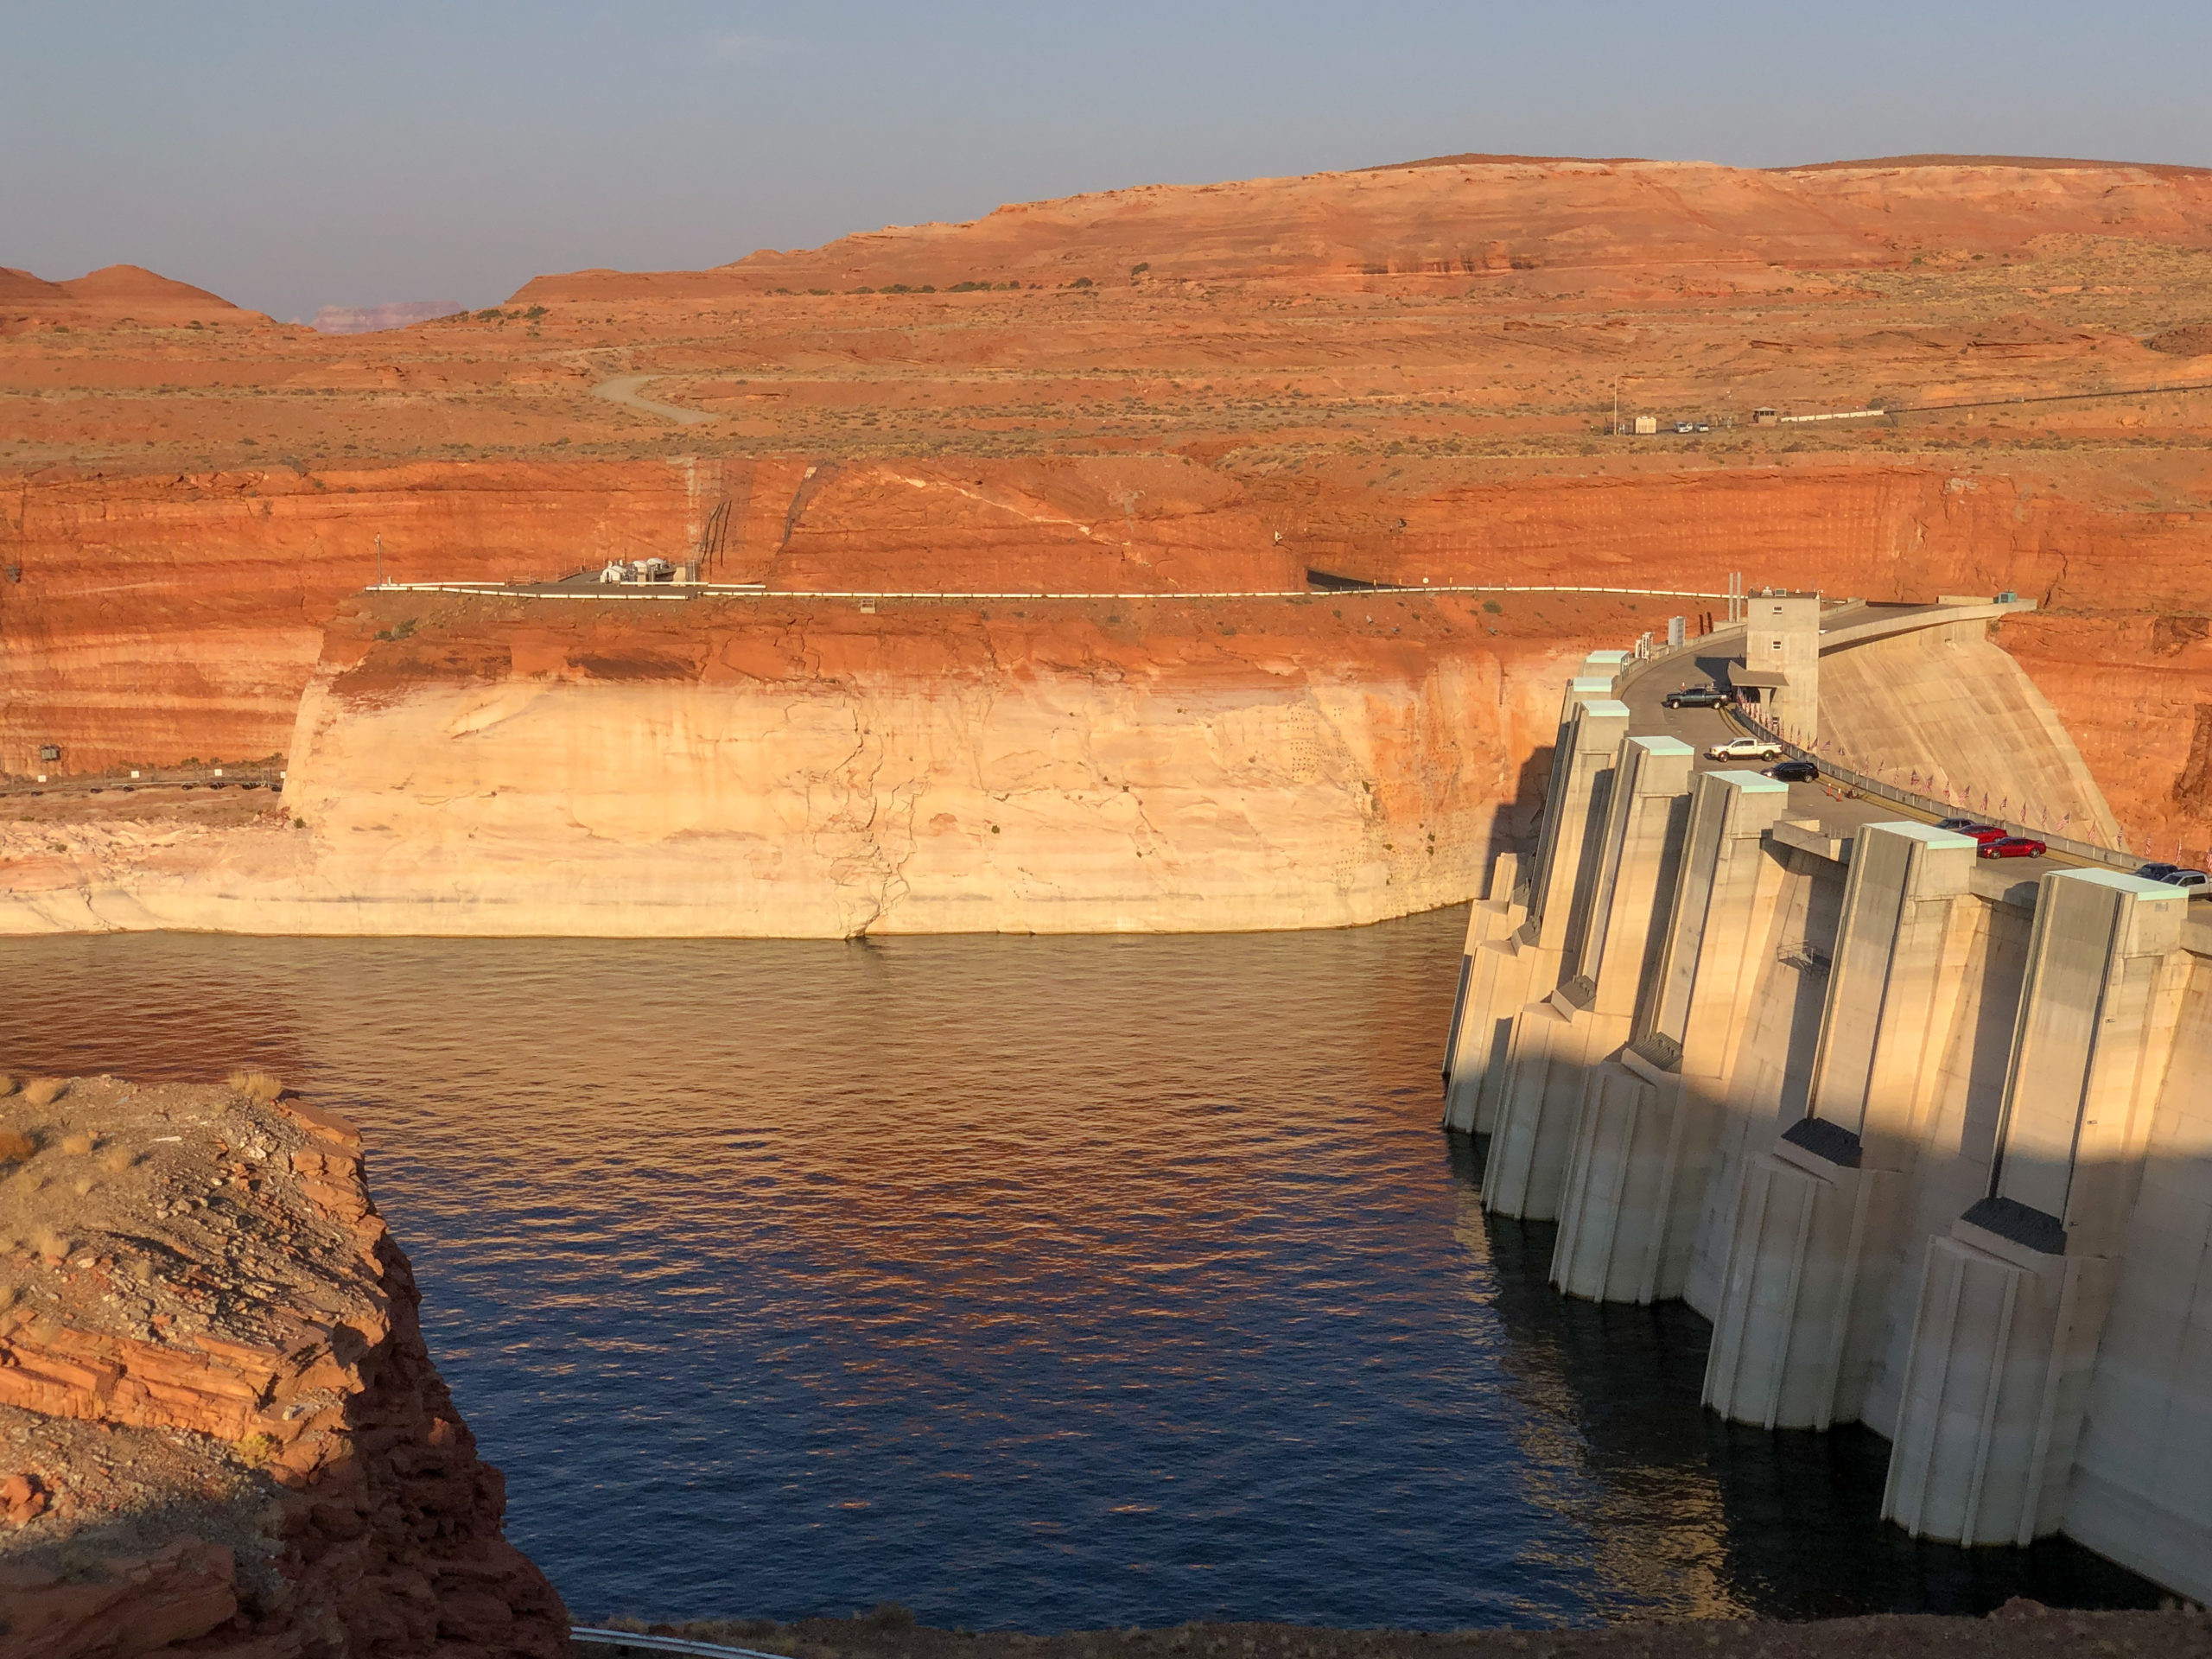 This picture of Glen Canyon Dam from Sept. 23 shows the “bathtub ring” around Lake Powell’s sandstone canyon walls. The ring was created by mineral deposits when the lake was at higher elevations. The distinct line in the rock is a clear reminder of how far water levels have fallen since 2000. Photo credit: Denver Water.